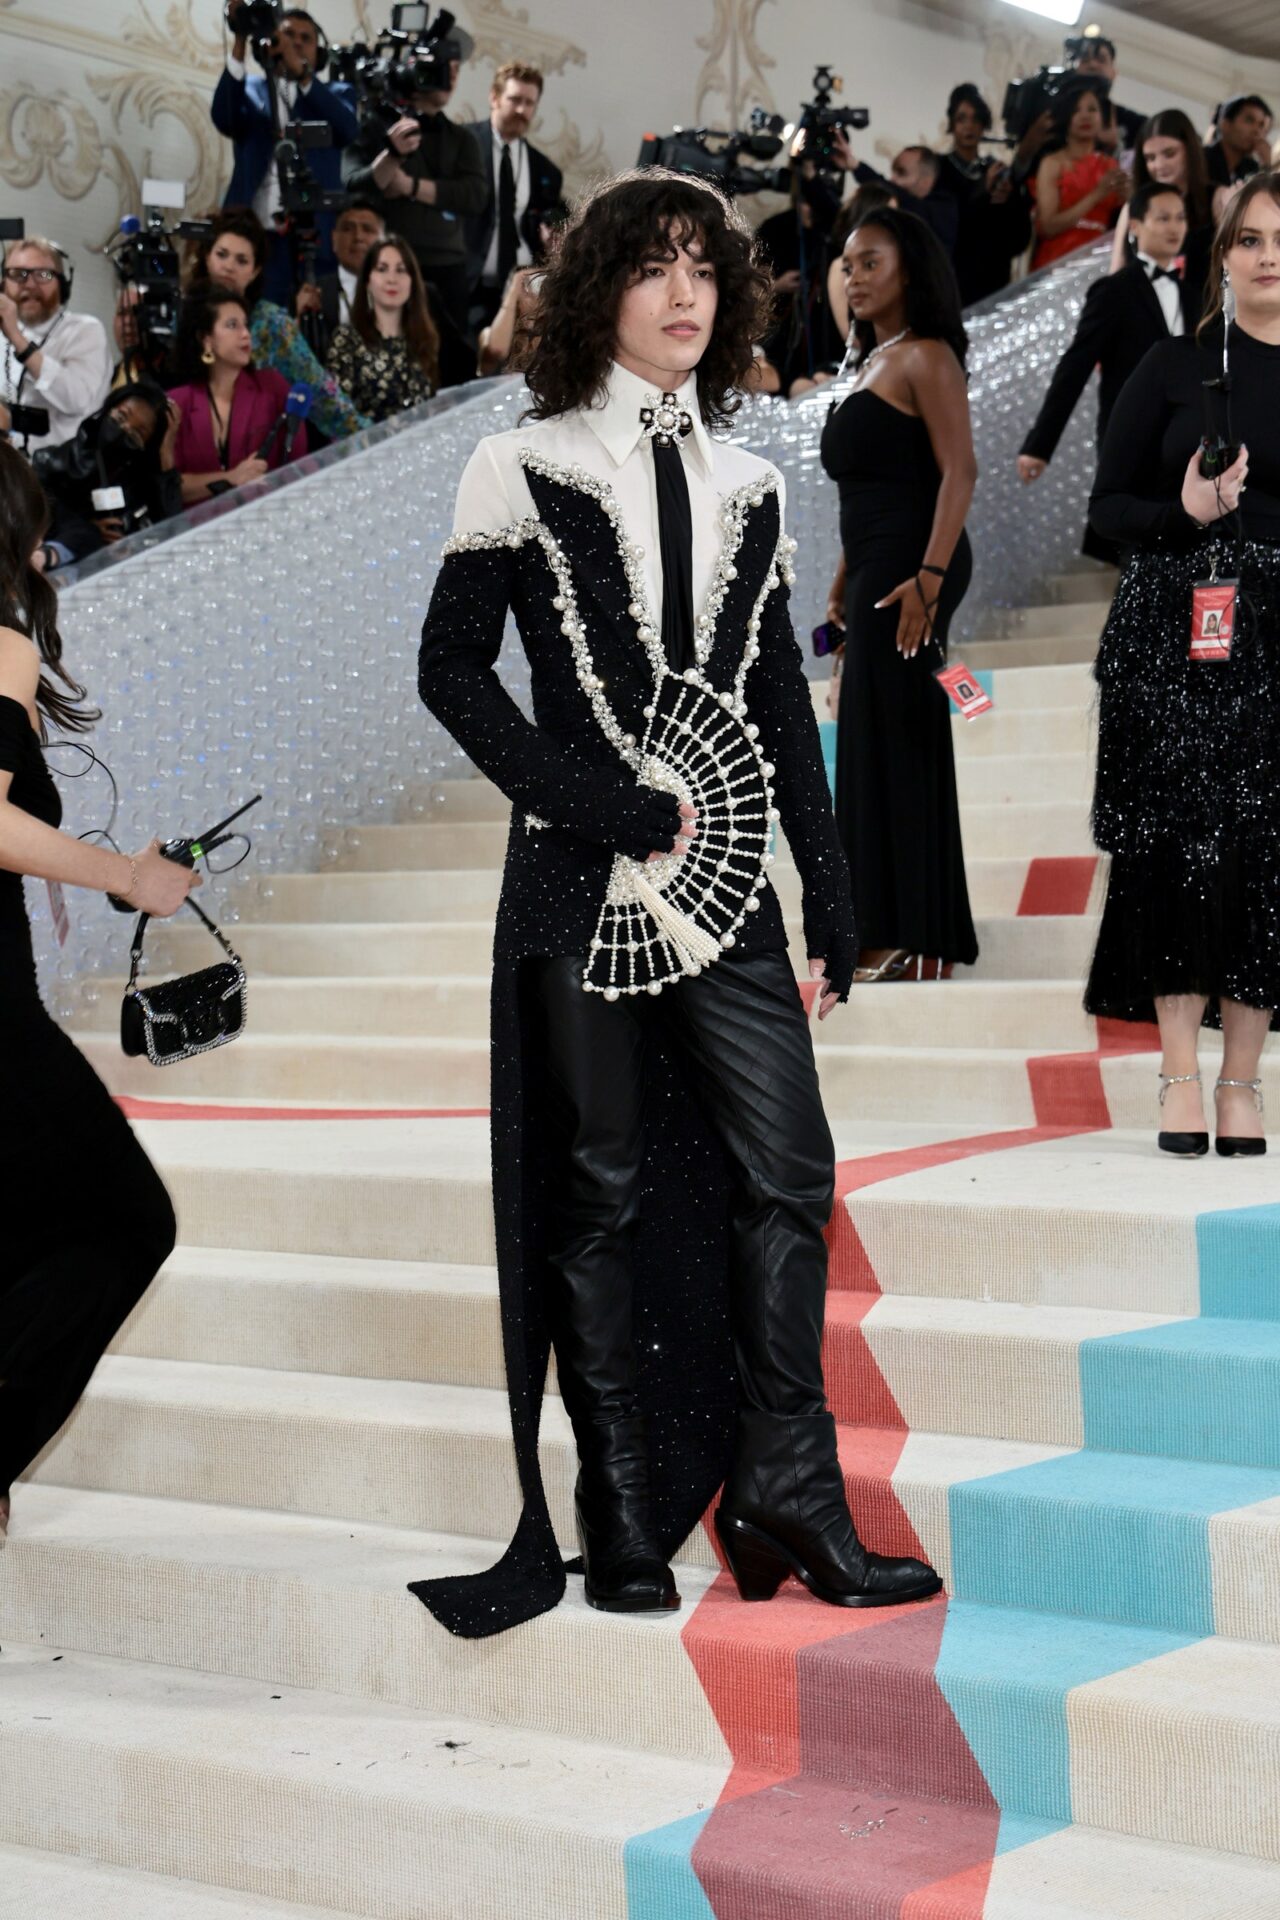 Karl Lagerfeld’s Legacy Of Revolutionary Modernity Continues On At The